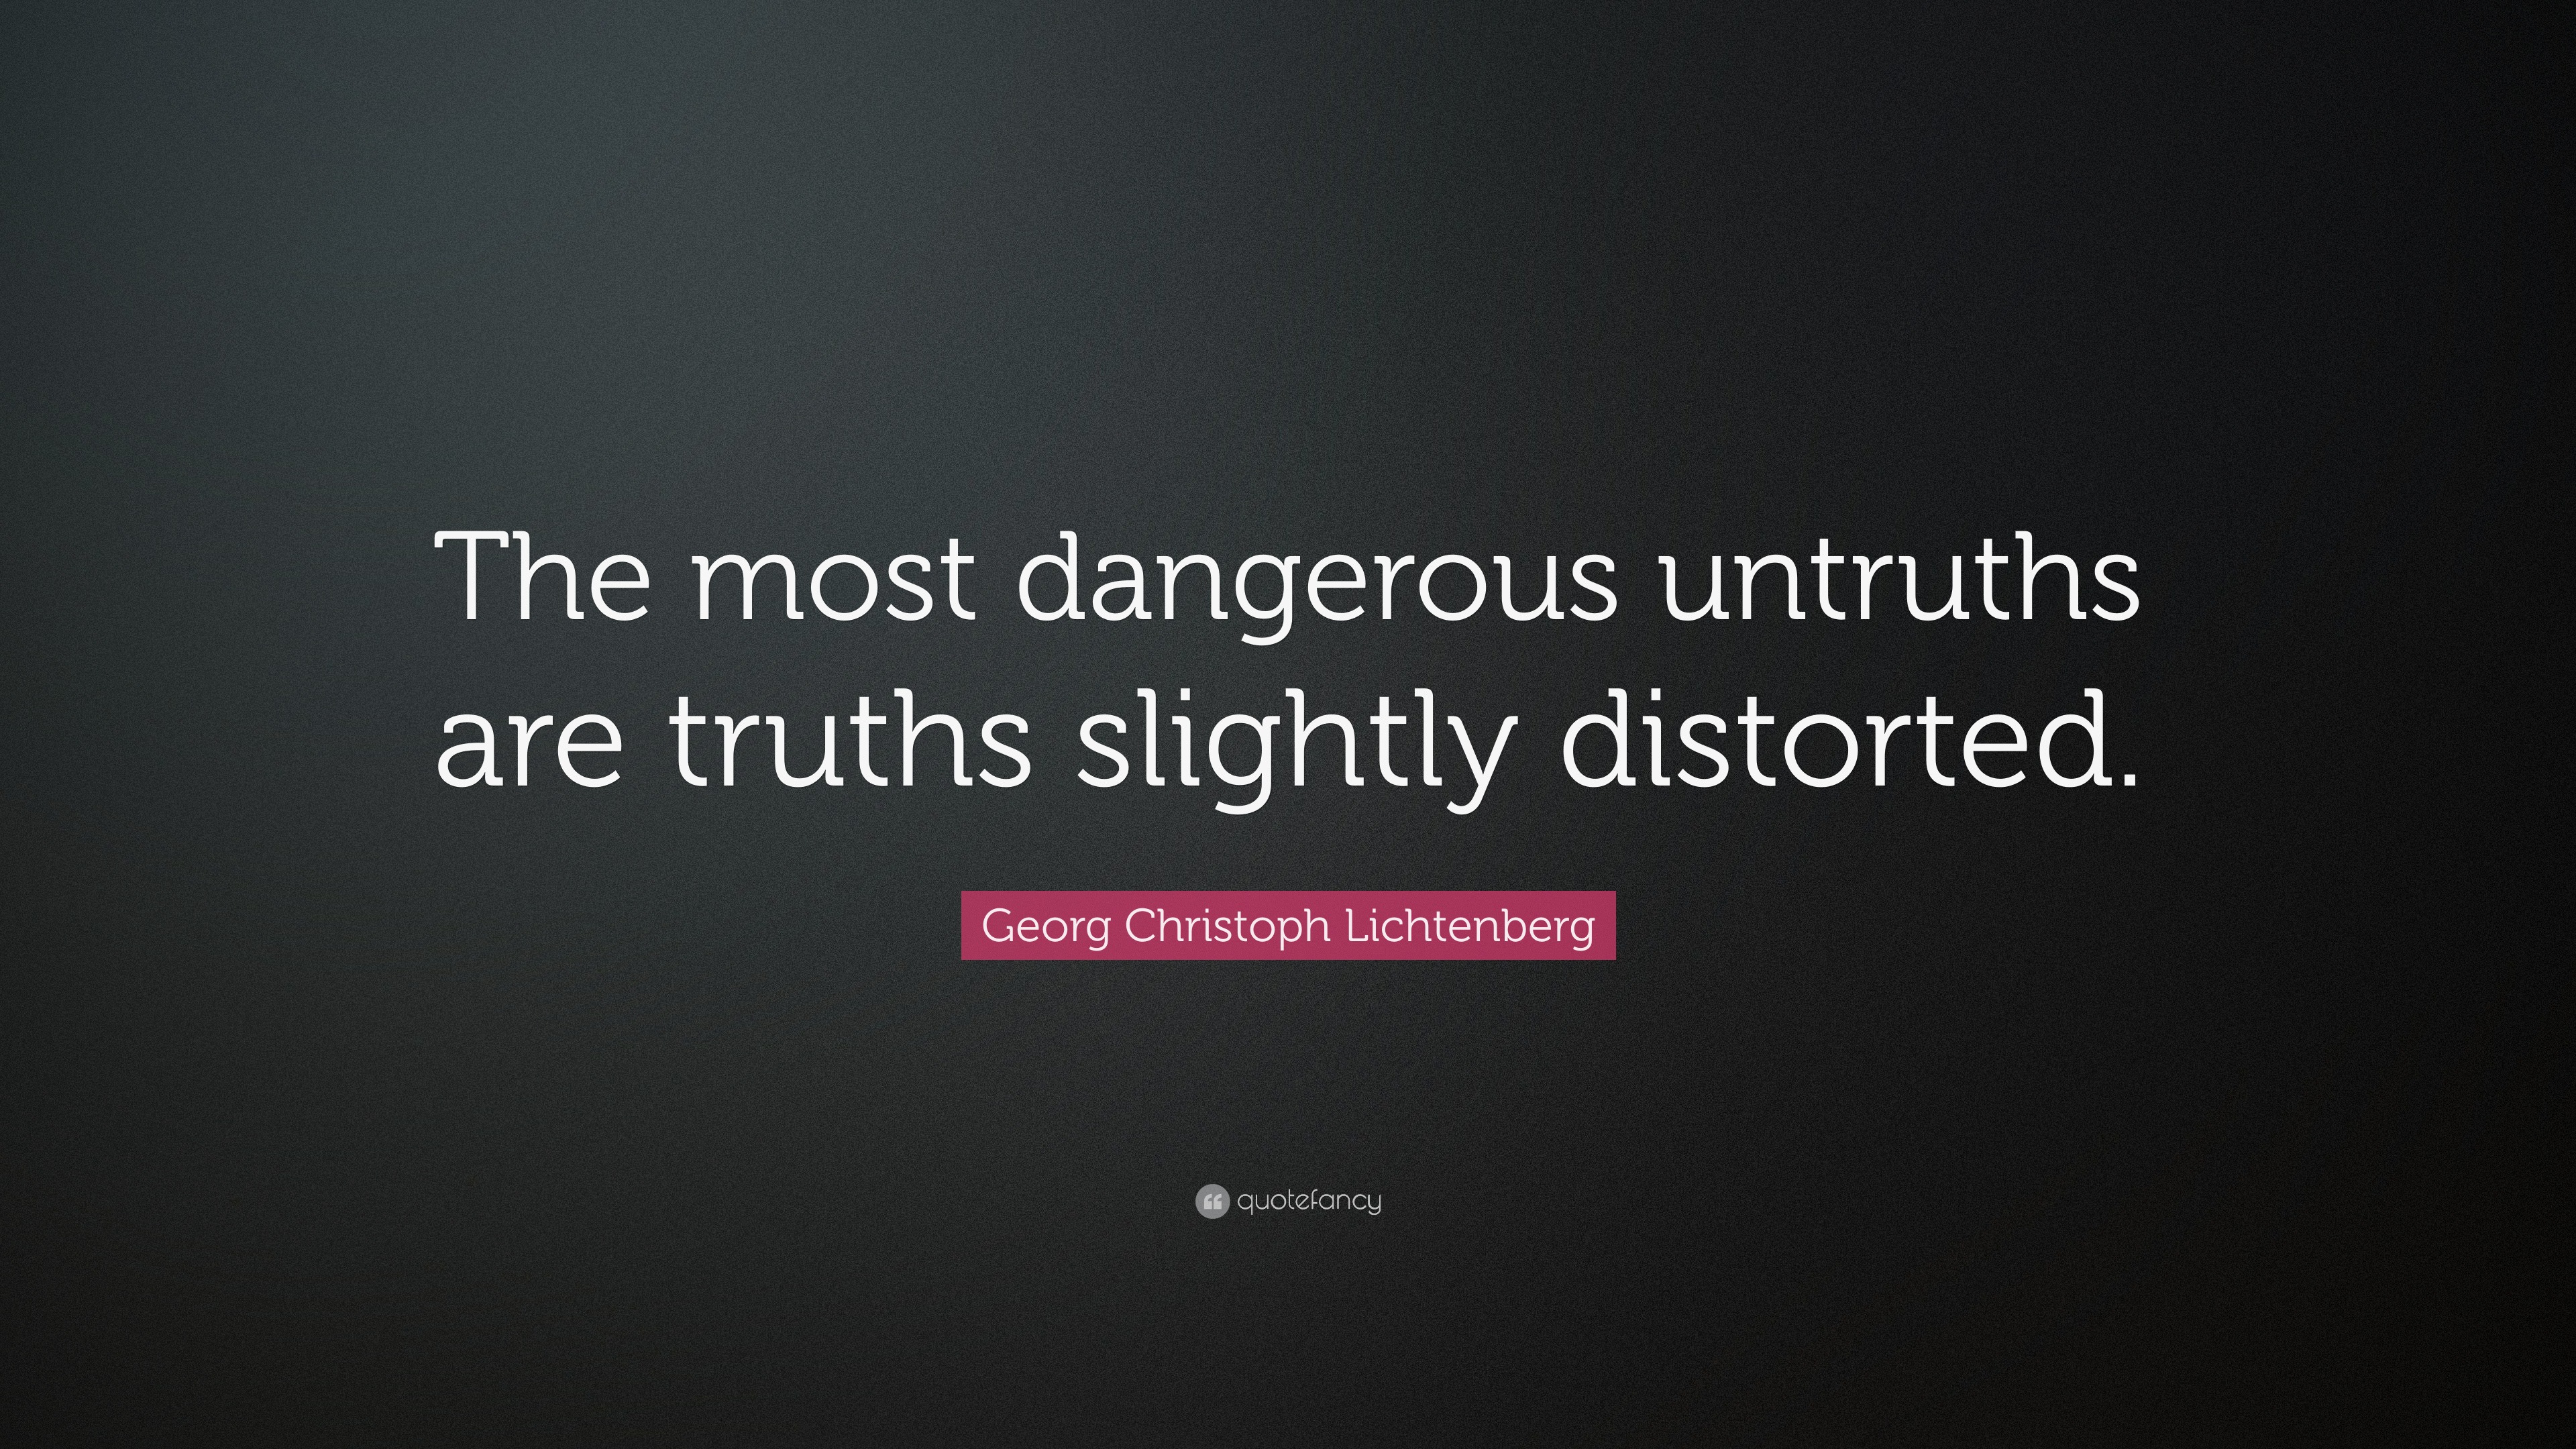 Georg Christoph Lichtenberg Quote: “The most dangerous untruths are ...